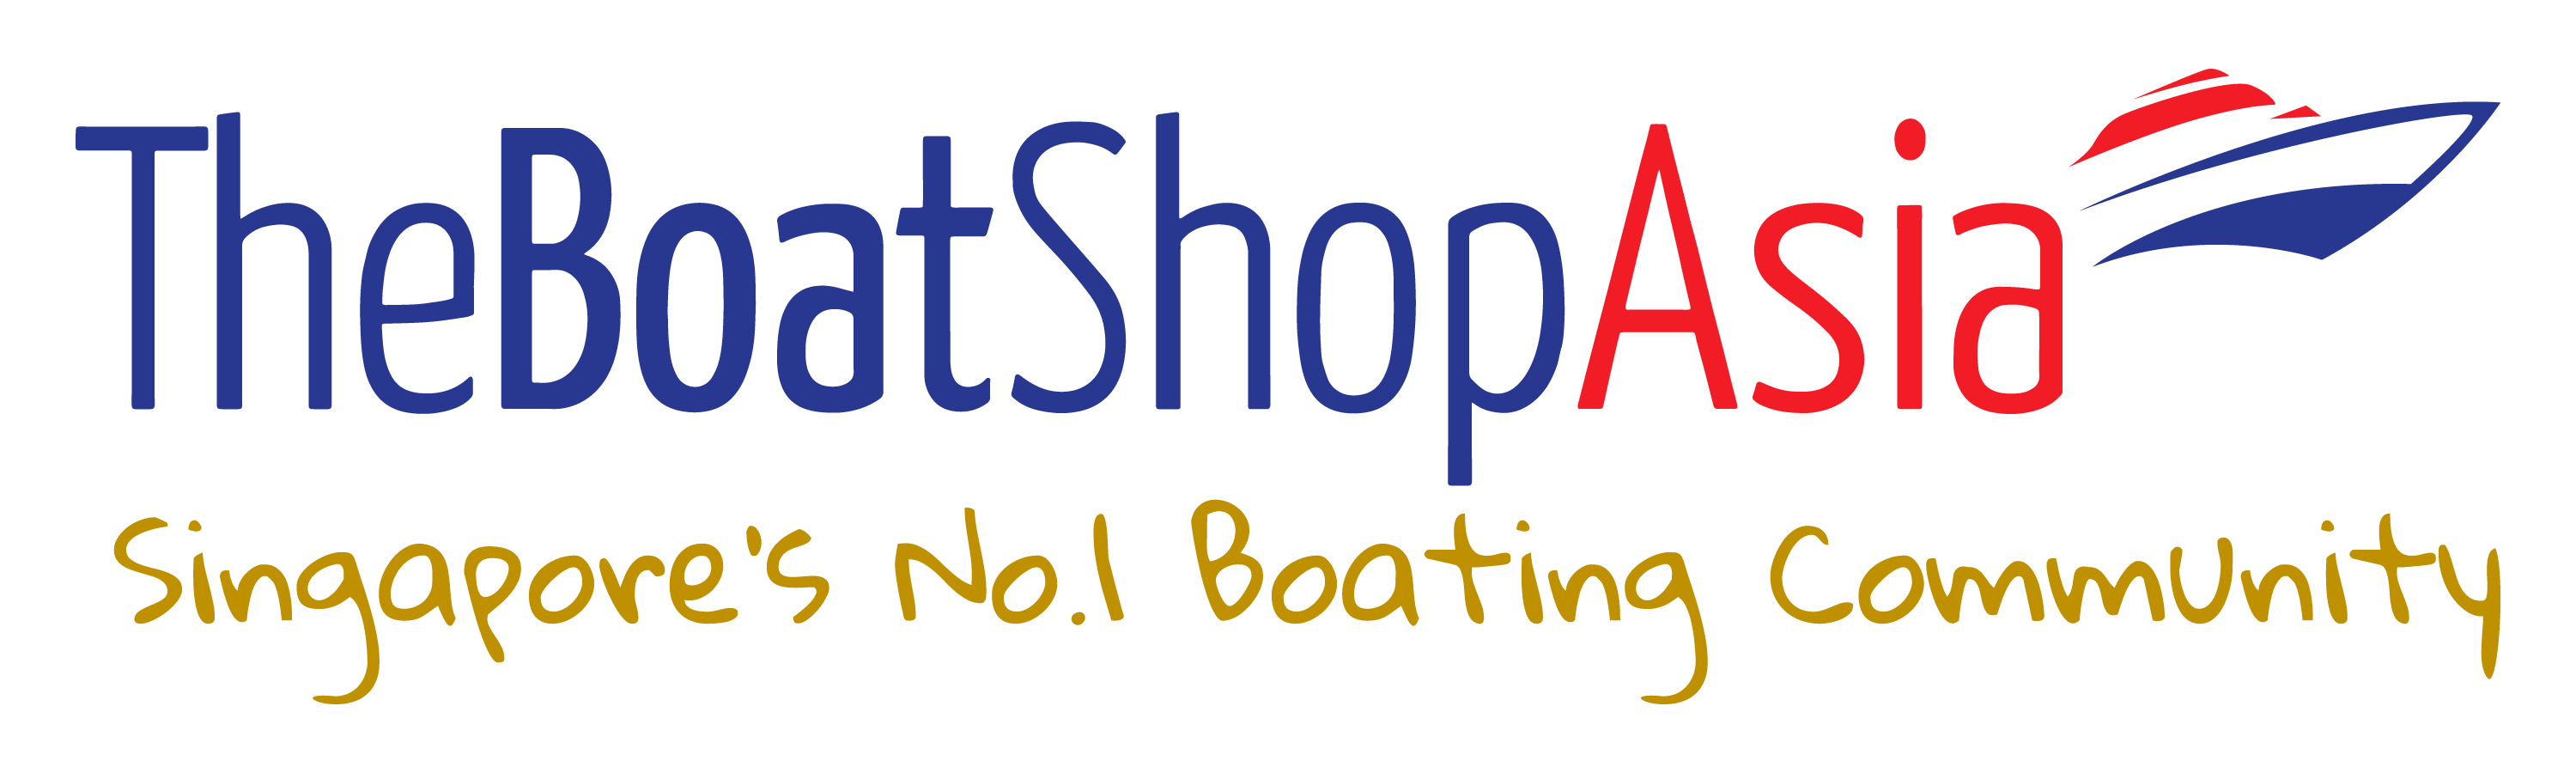 Company logo for The Boat Shop Pte. Ltd.